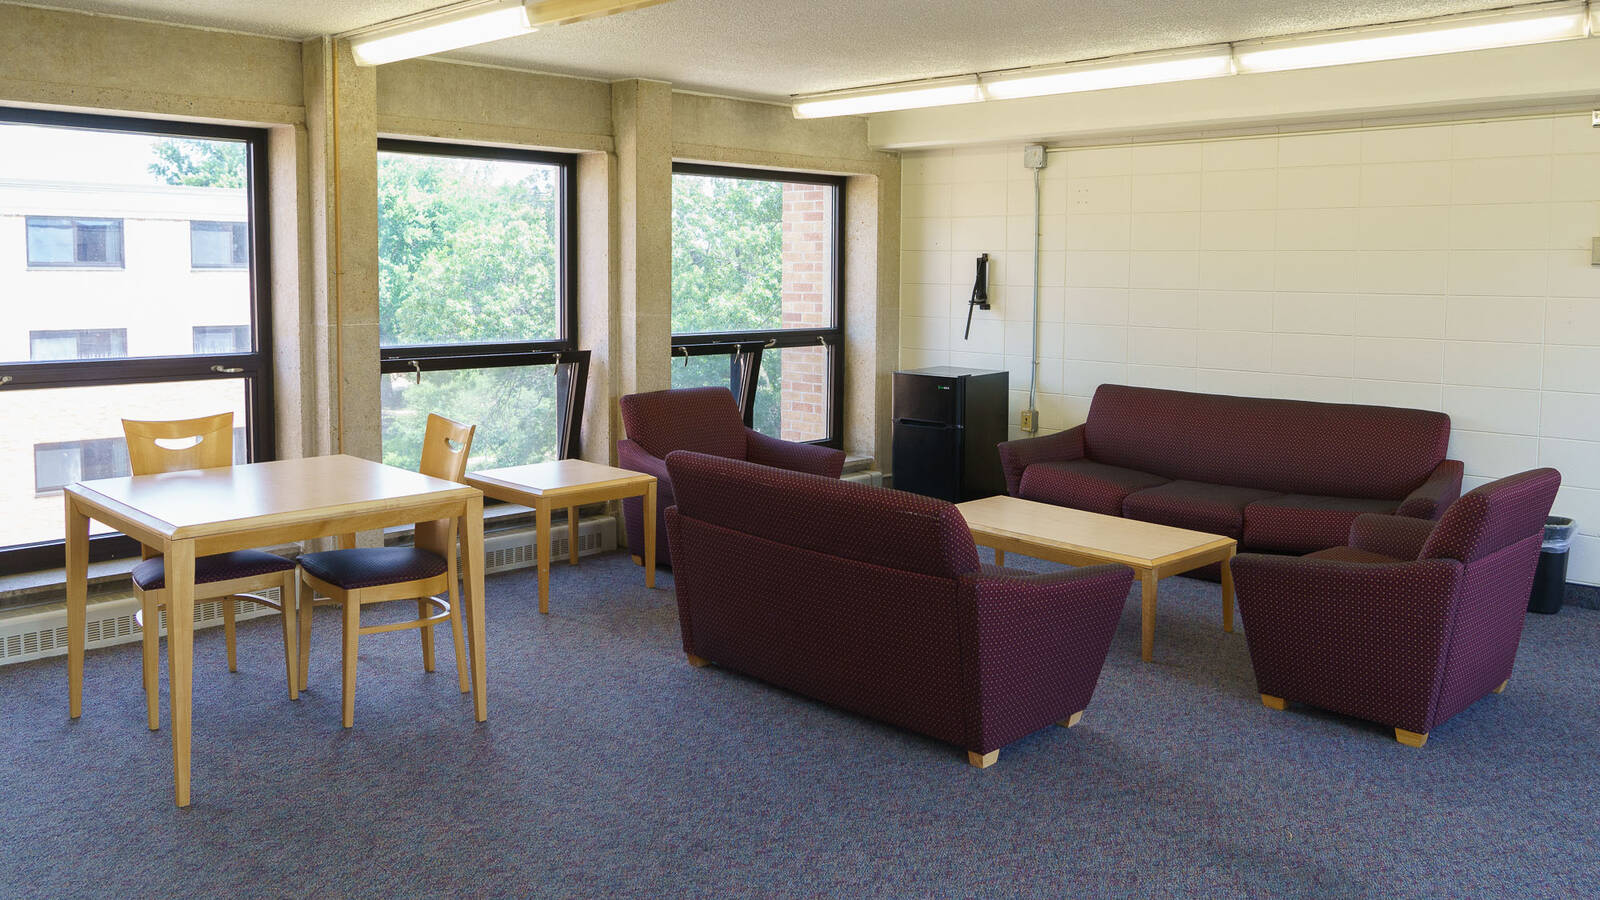 A common space with couches for lounging and tables for studying.